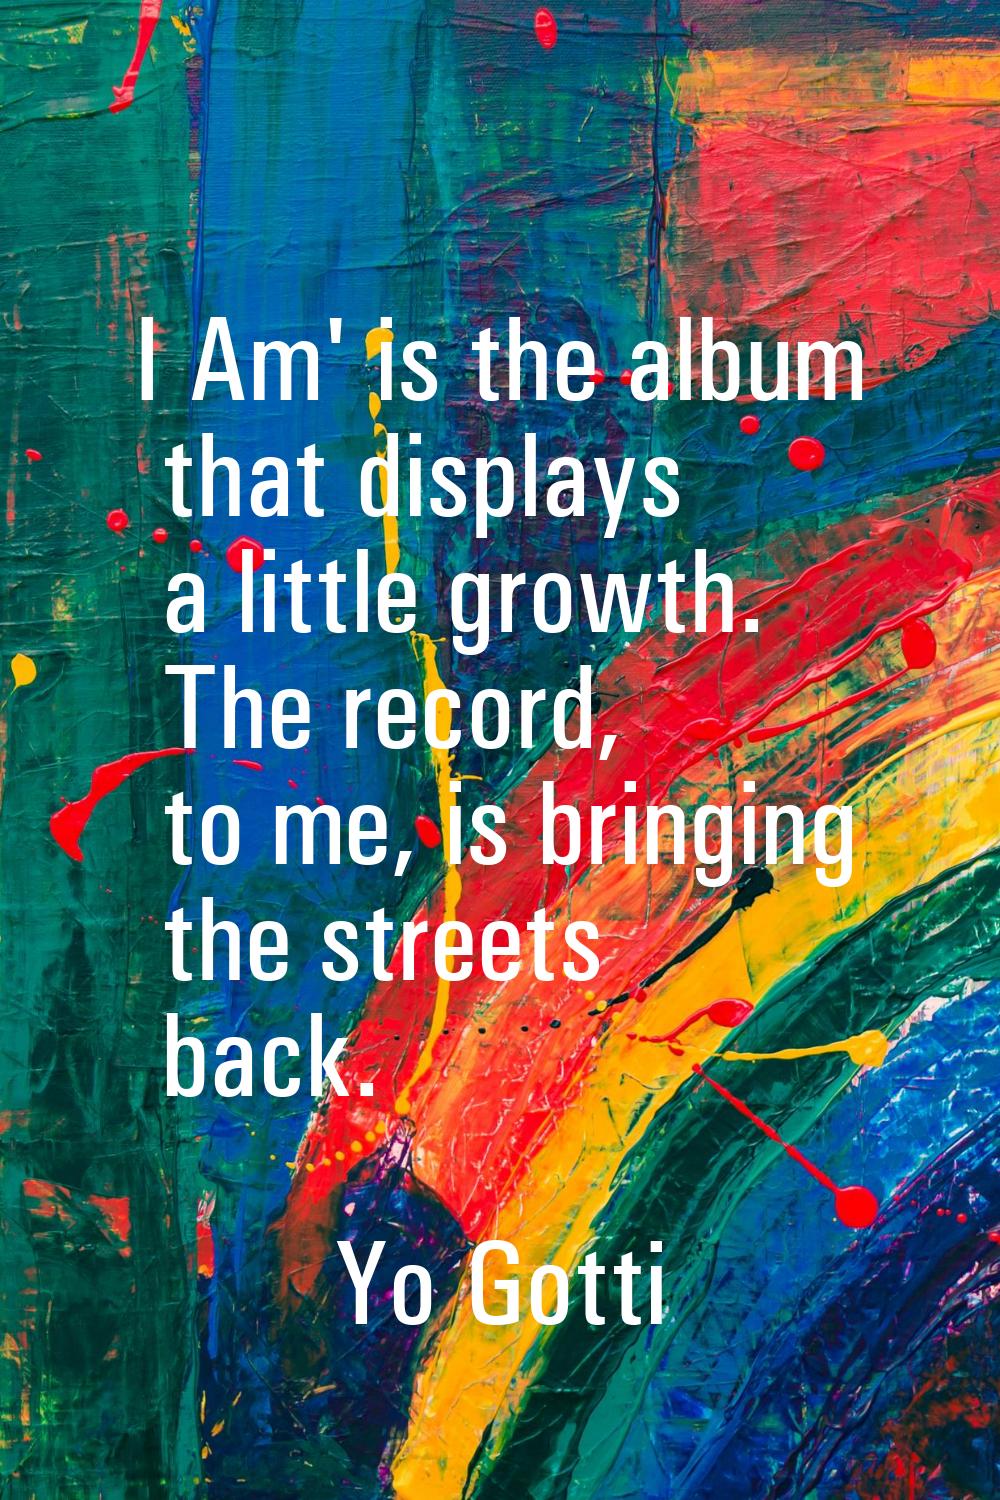 I Am' is the album that displays a little growth. The record, to me, is bringing the streets back.